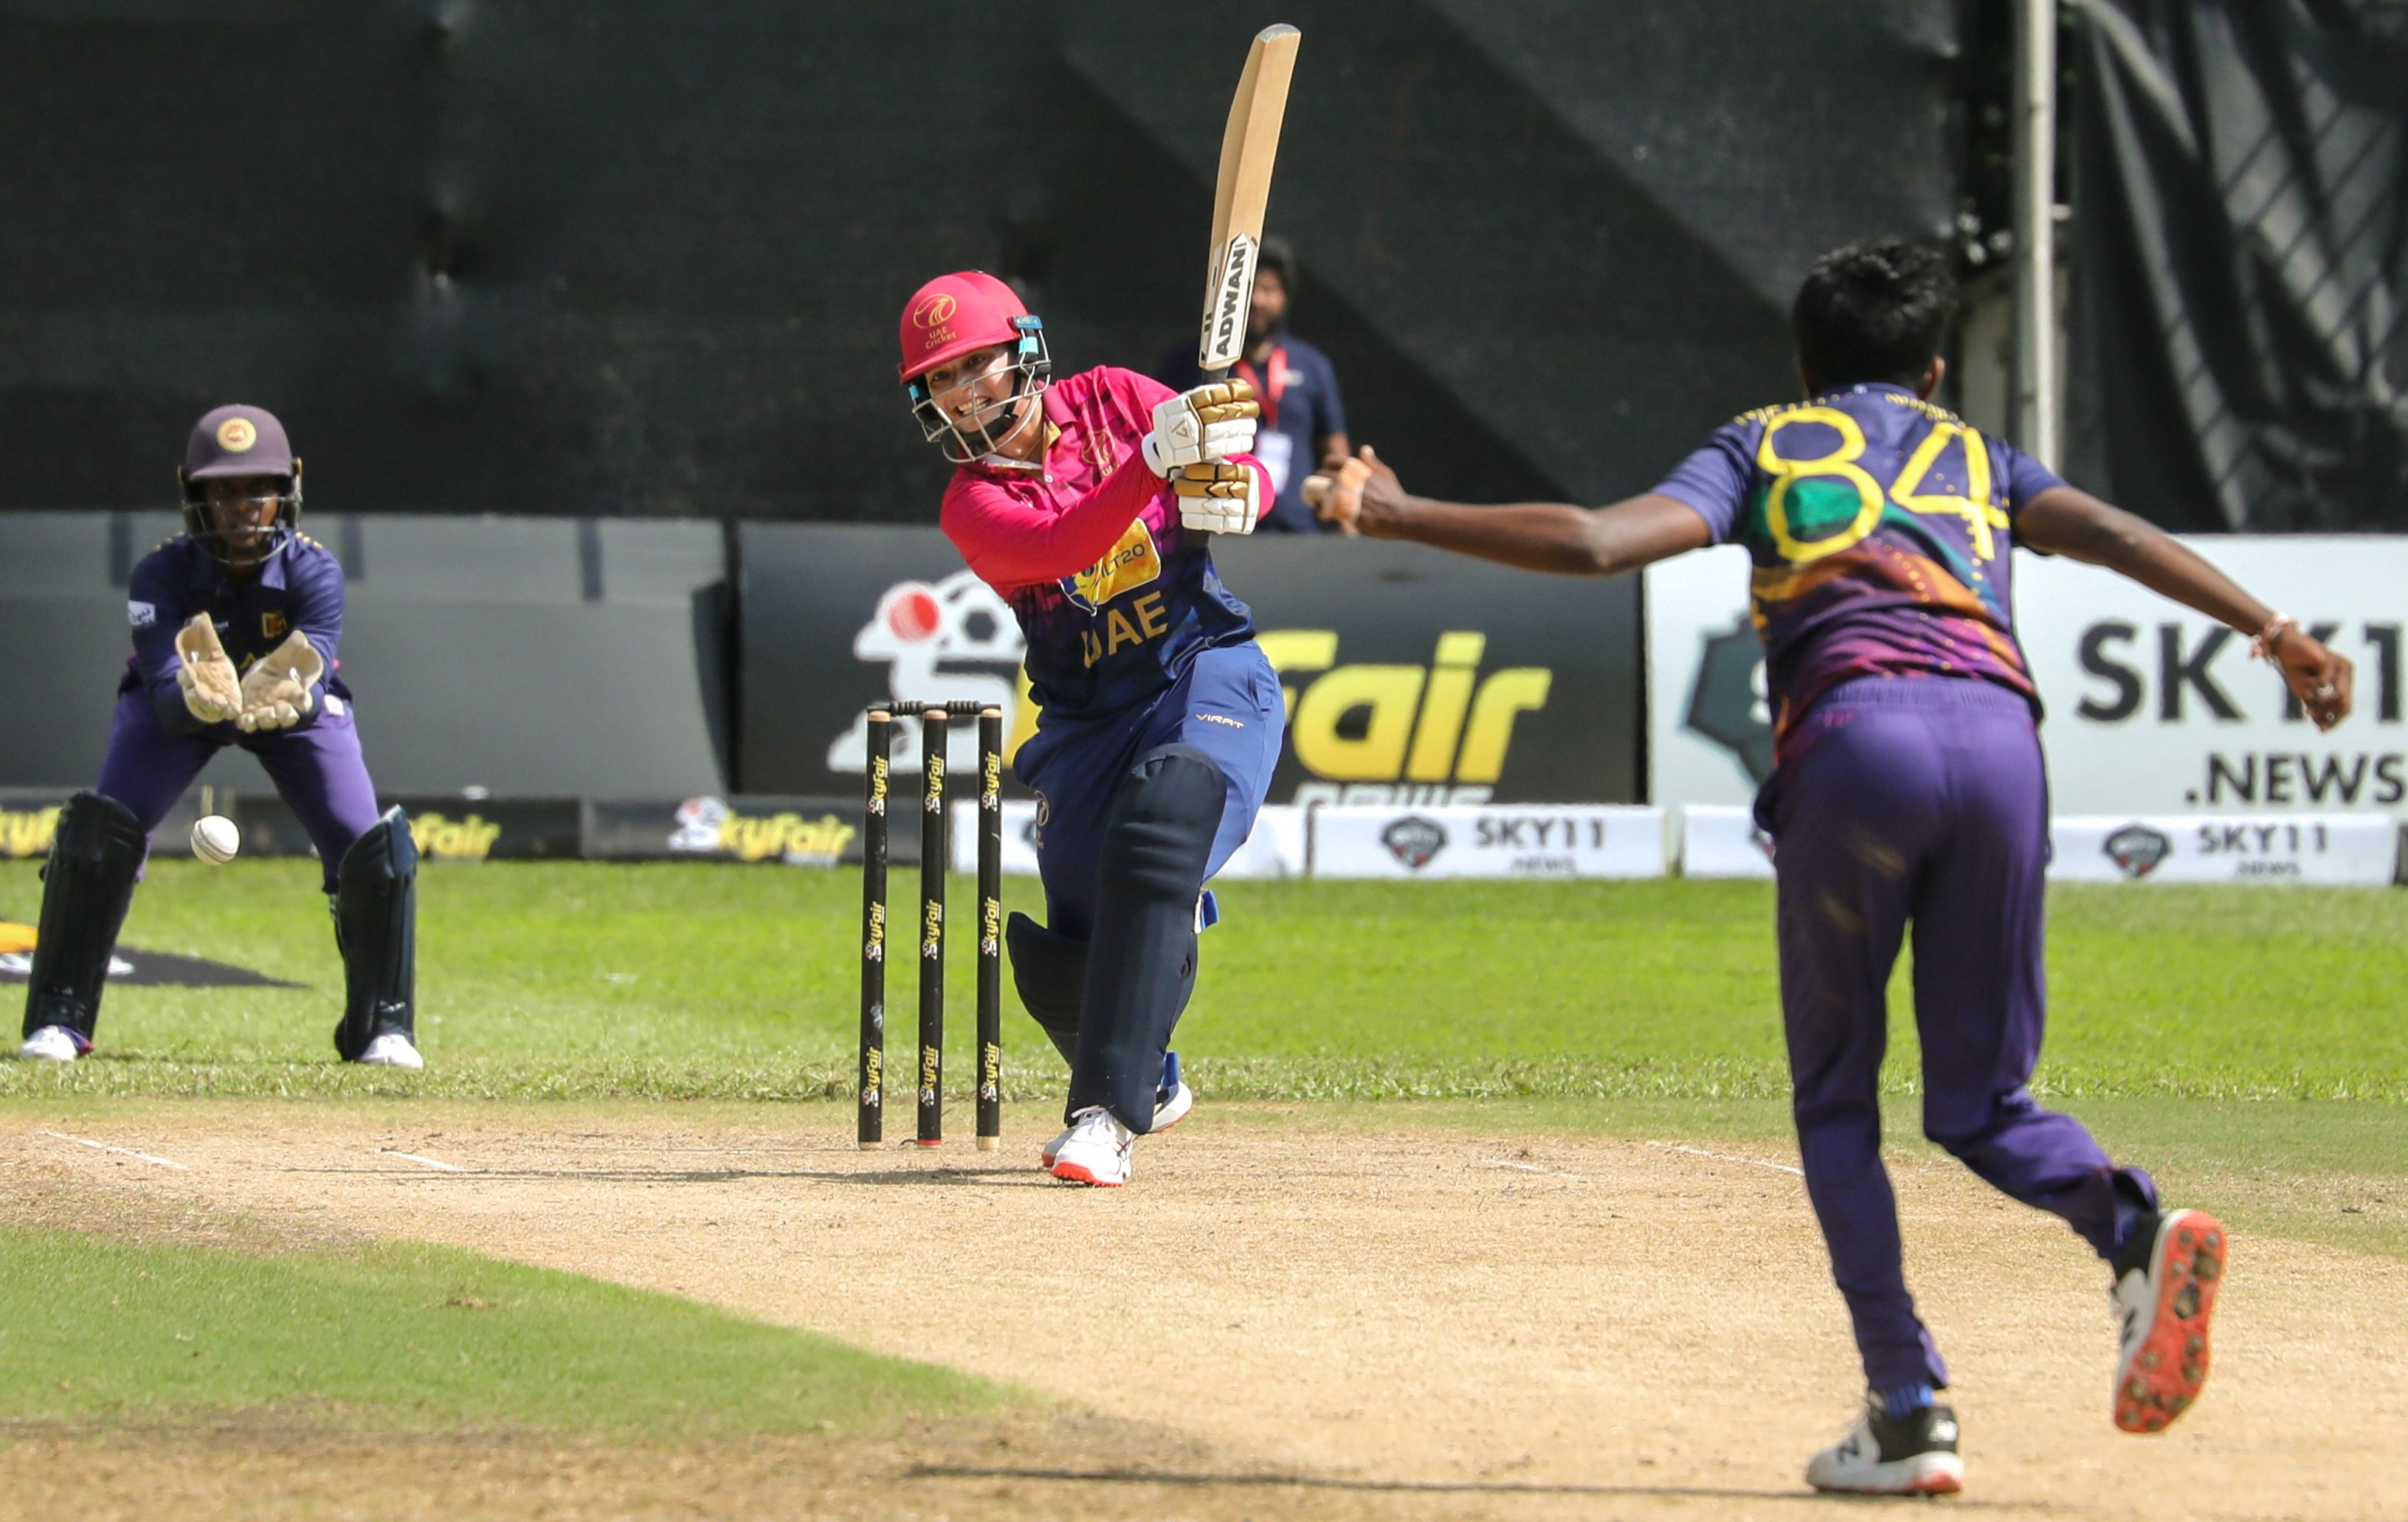 Madushika Methtananda (right) of Sri Lanka performed well with bat and ball in the win over UAE. Photo: Xiaomei Chen